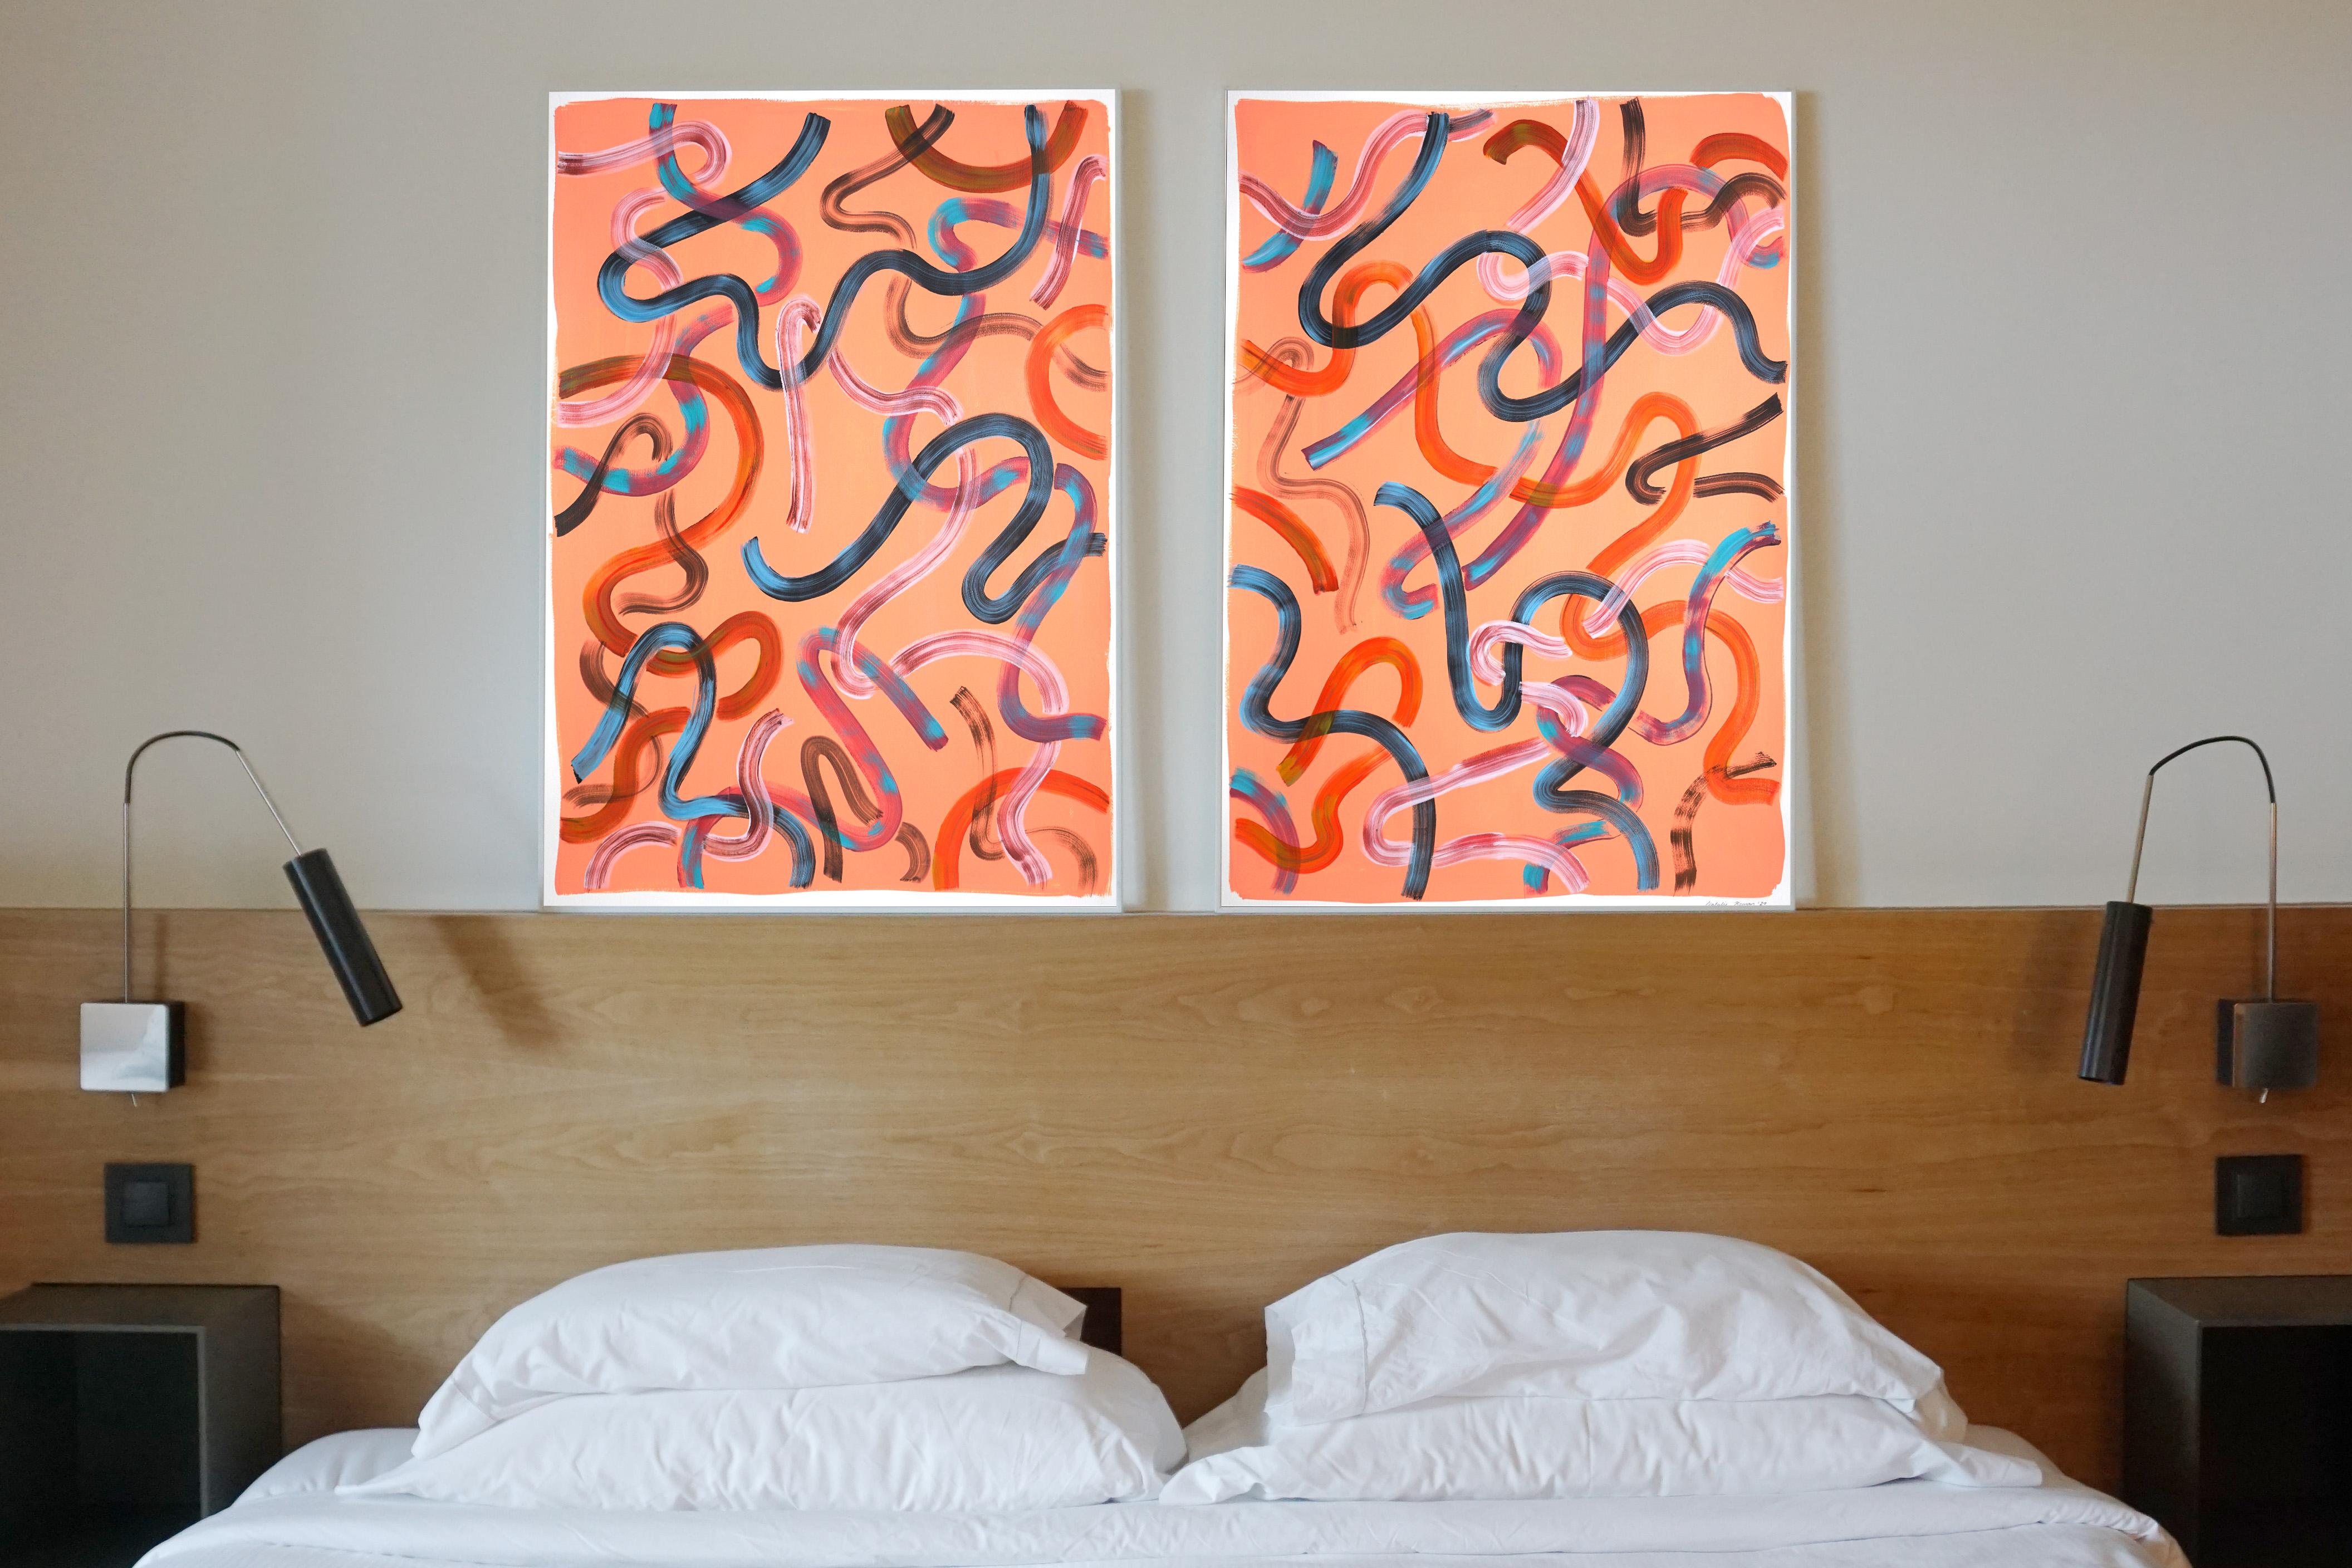 Abstract Diptych of Pastel Salmon Swirls, Southwestern Style Brushstrokes, 2021 - Painting by Natalia Roman